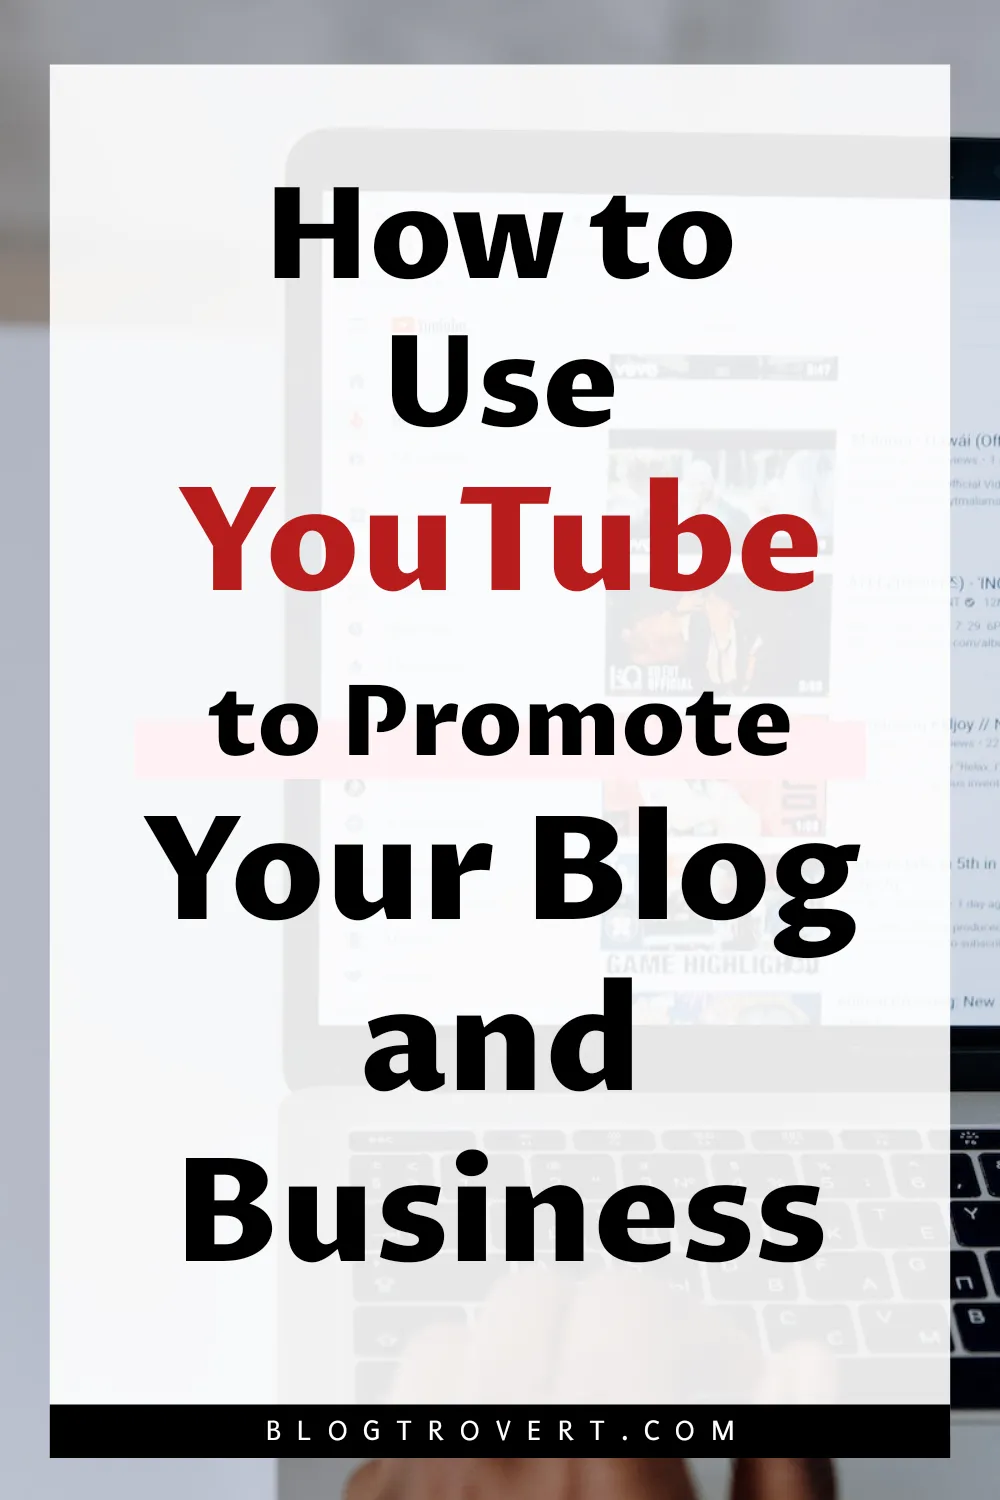 How to use YouTube to grow your business and blog effectively in [year] 2